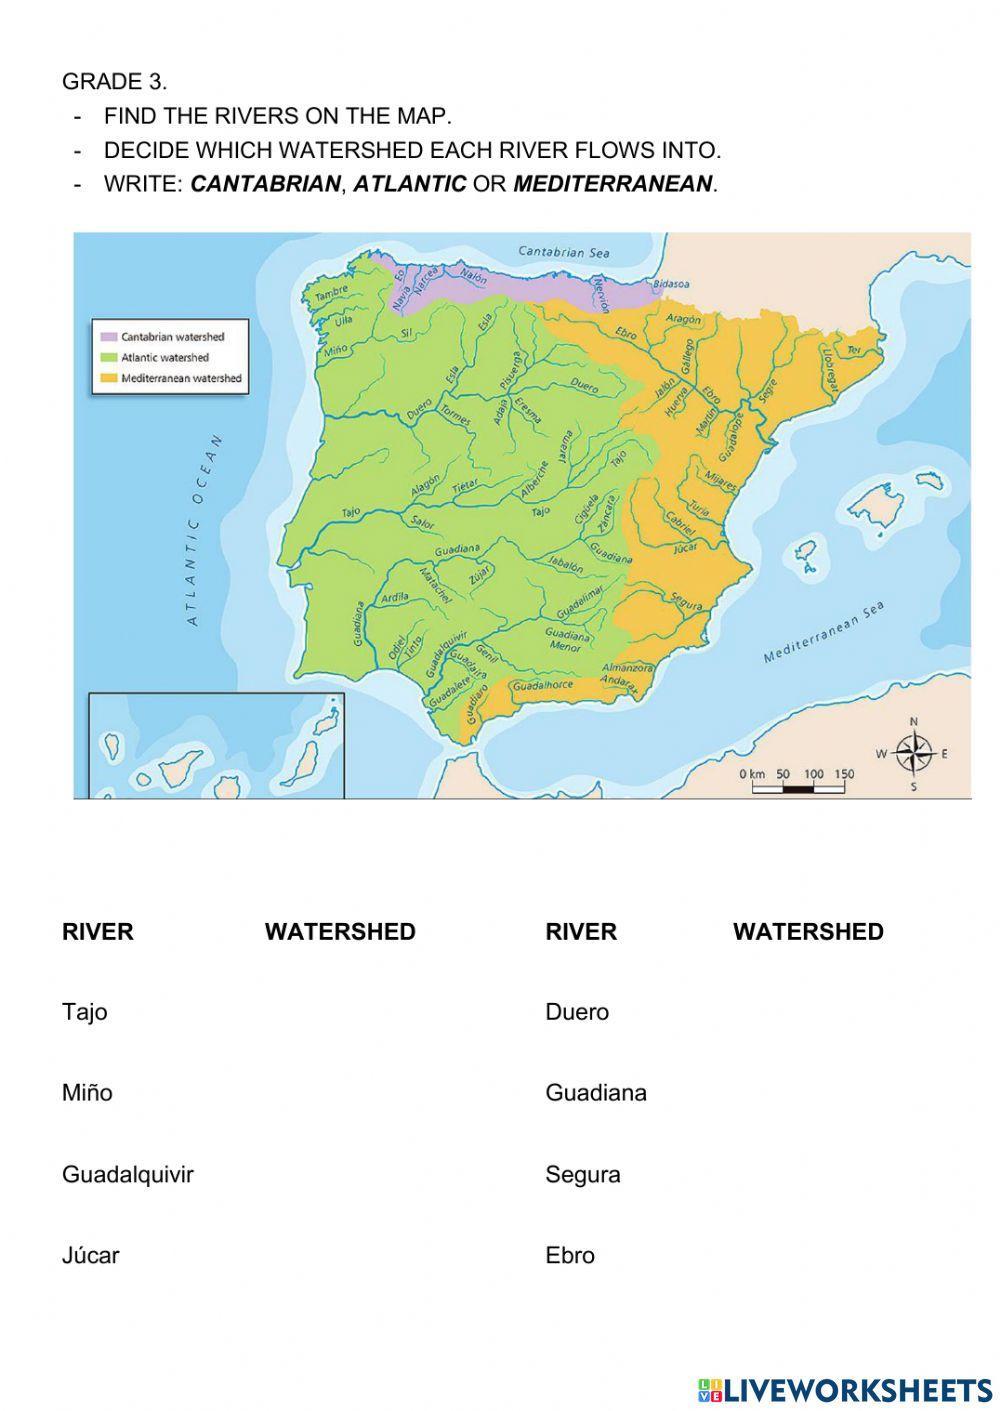 Spanish School Yard Watersheds Fundana. Fun way to learn about water,  watersheds in Spanish! Great for English immersion schools, and more!